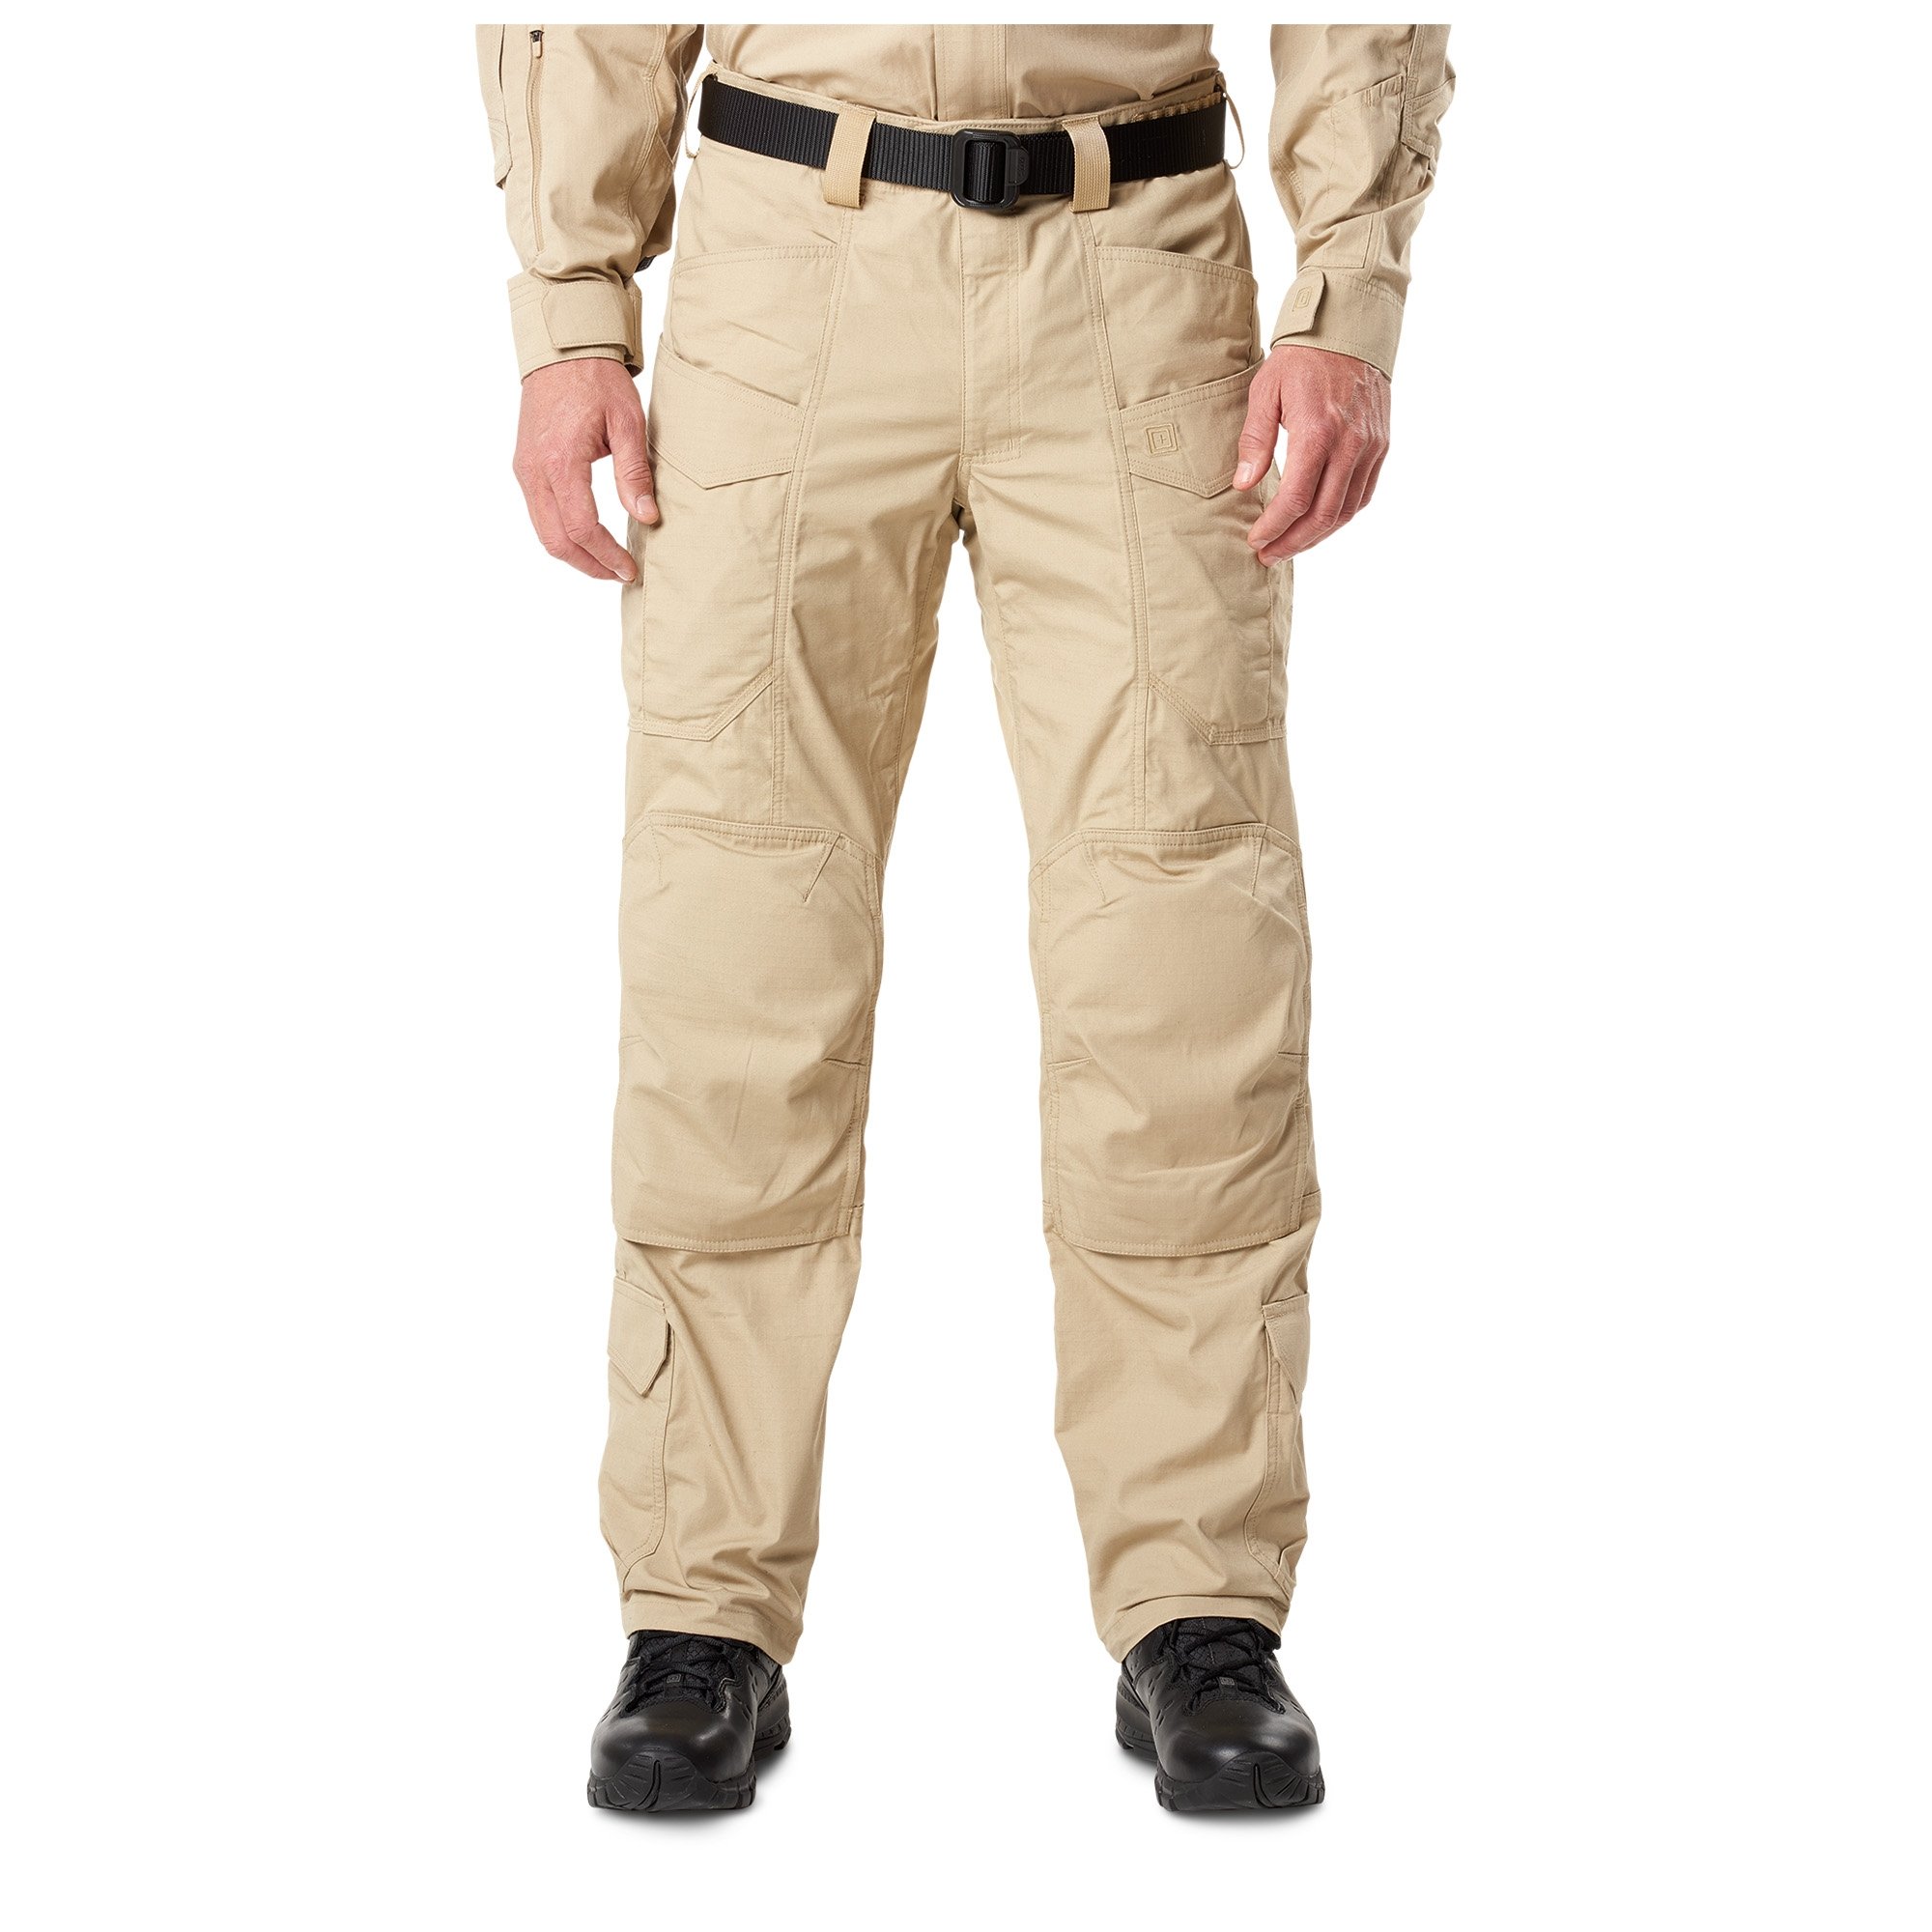  5.11 Tactical Pants,Coyote Brown,30Wx30L : Clothing